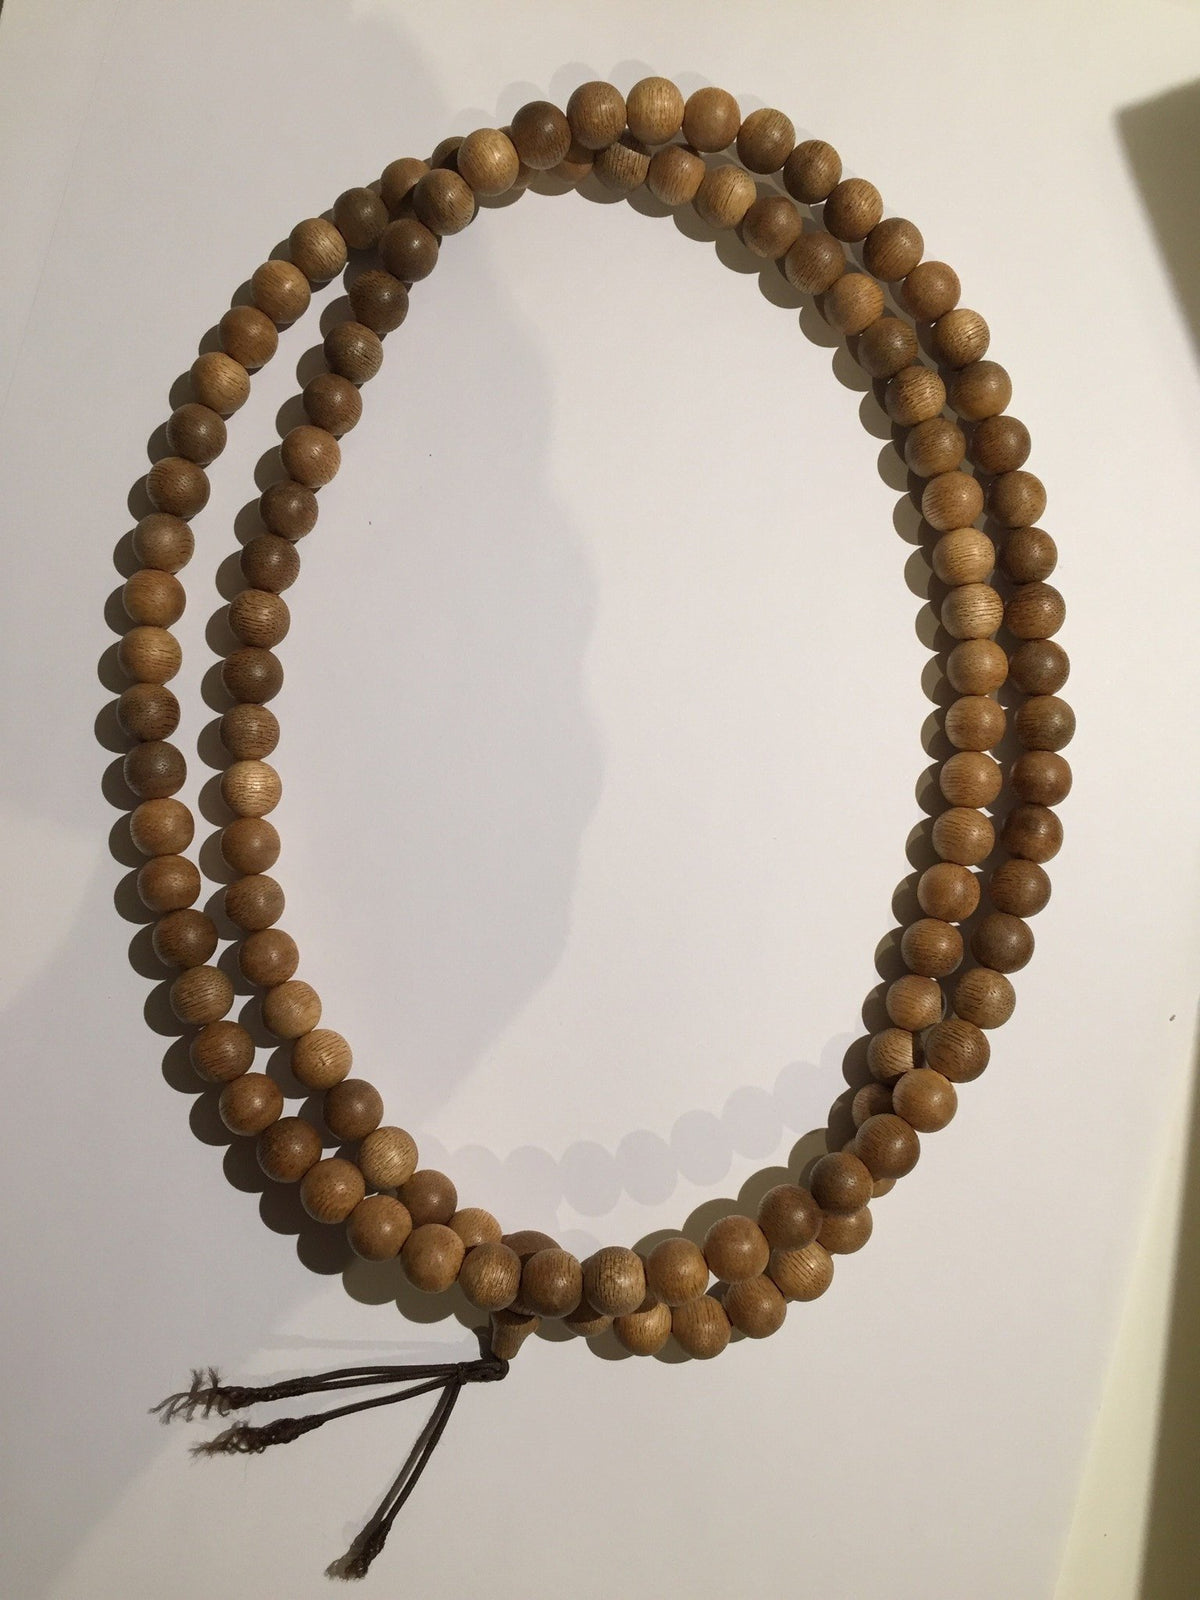 SOLD- Vietnamese Cultivated Agarwood 108 mala -